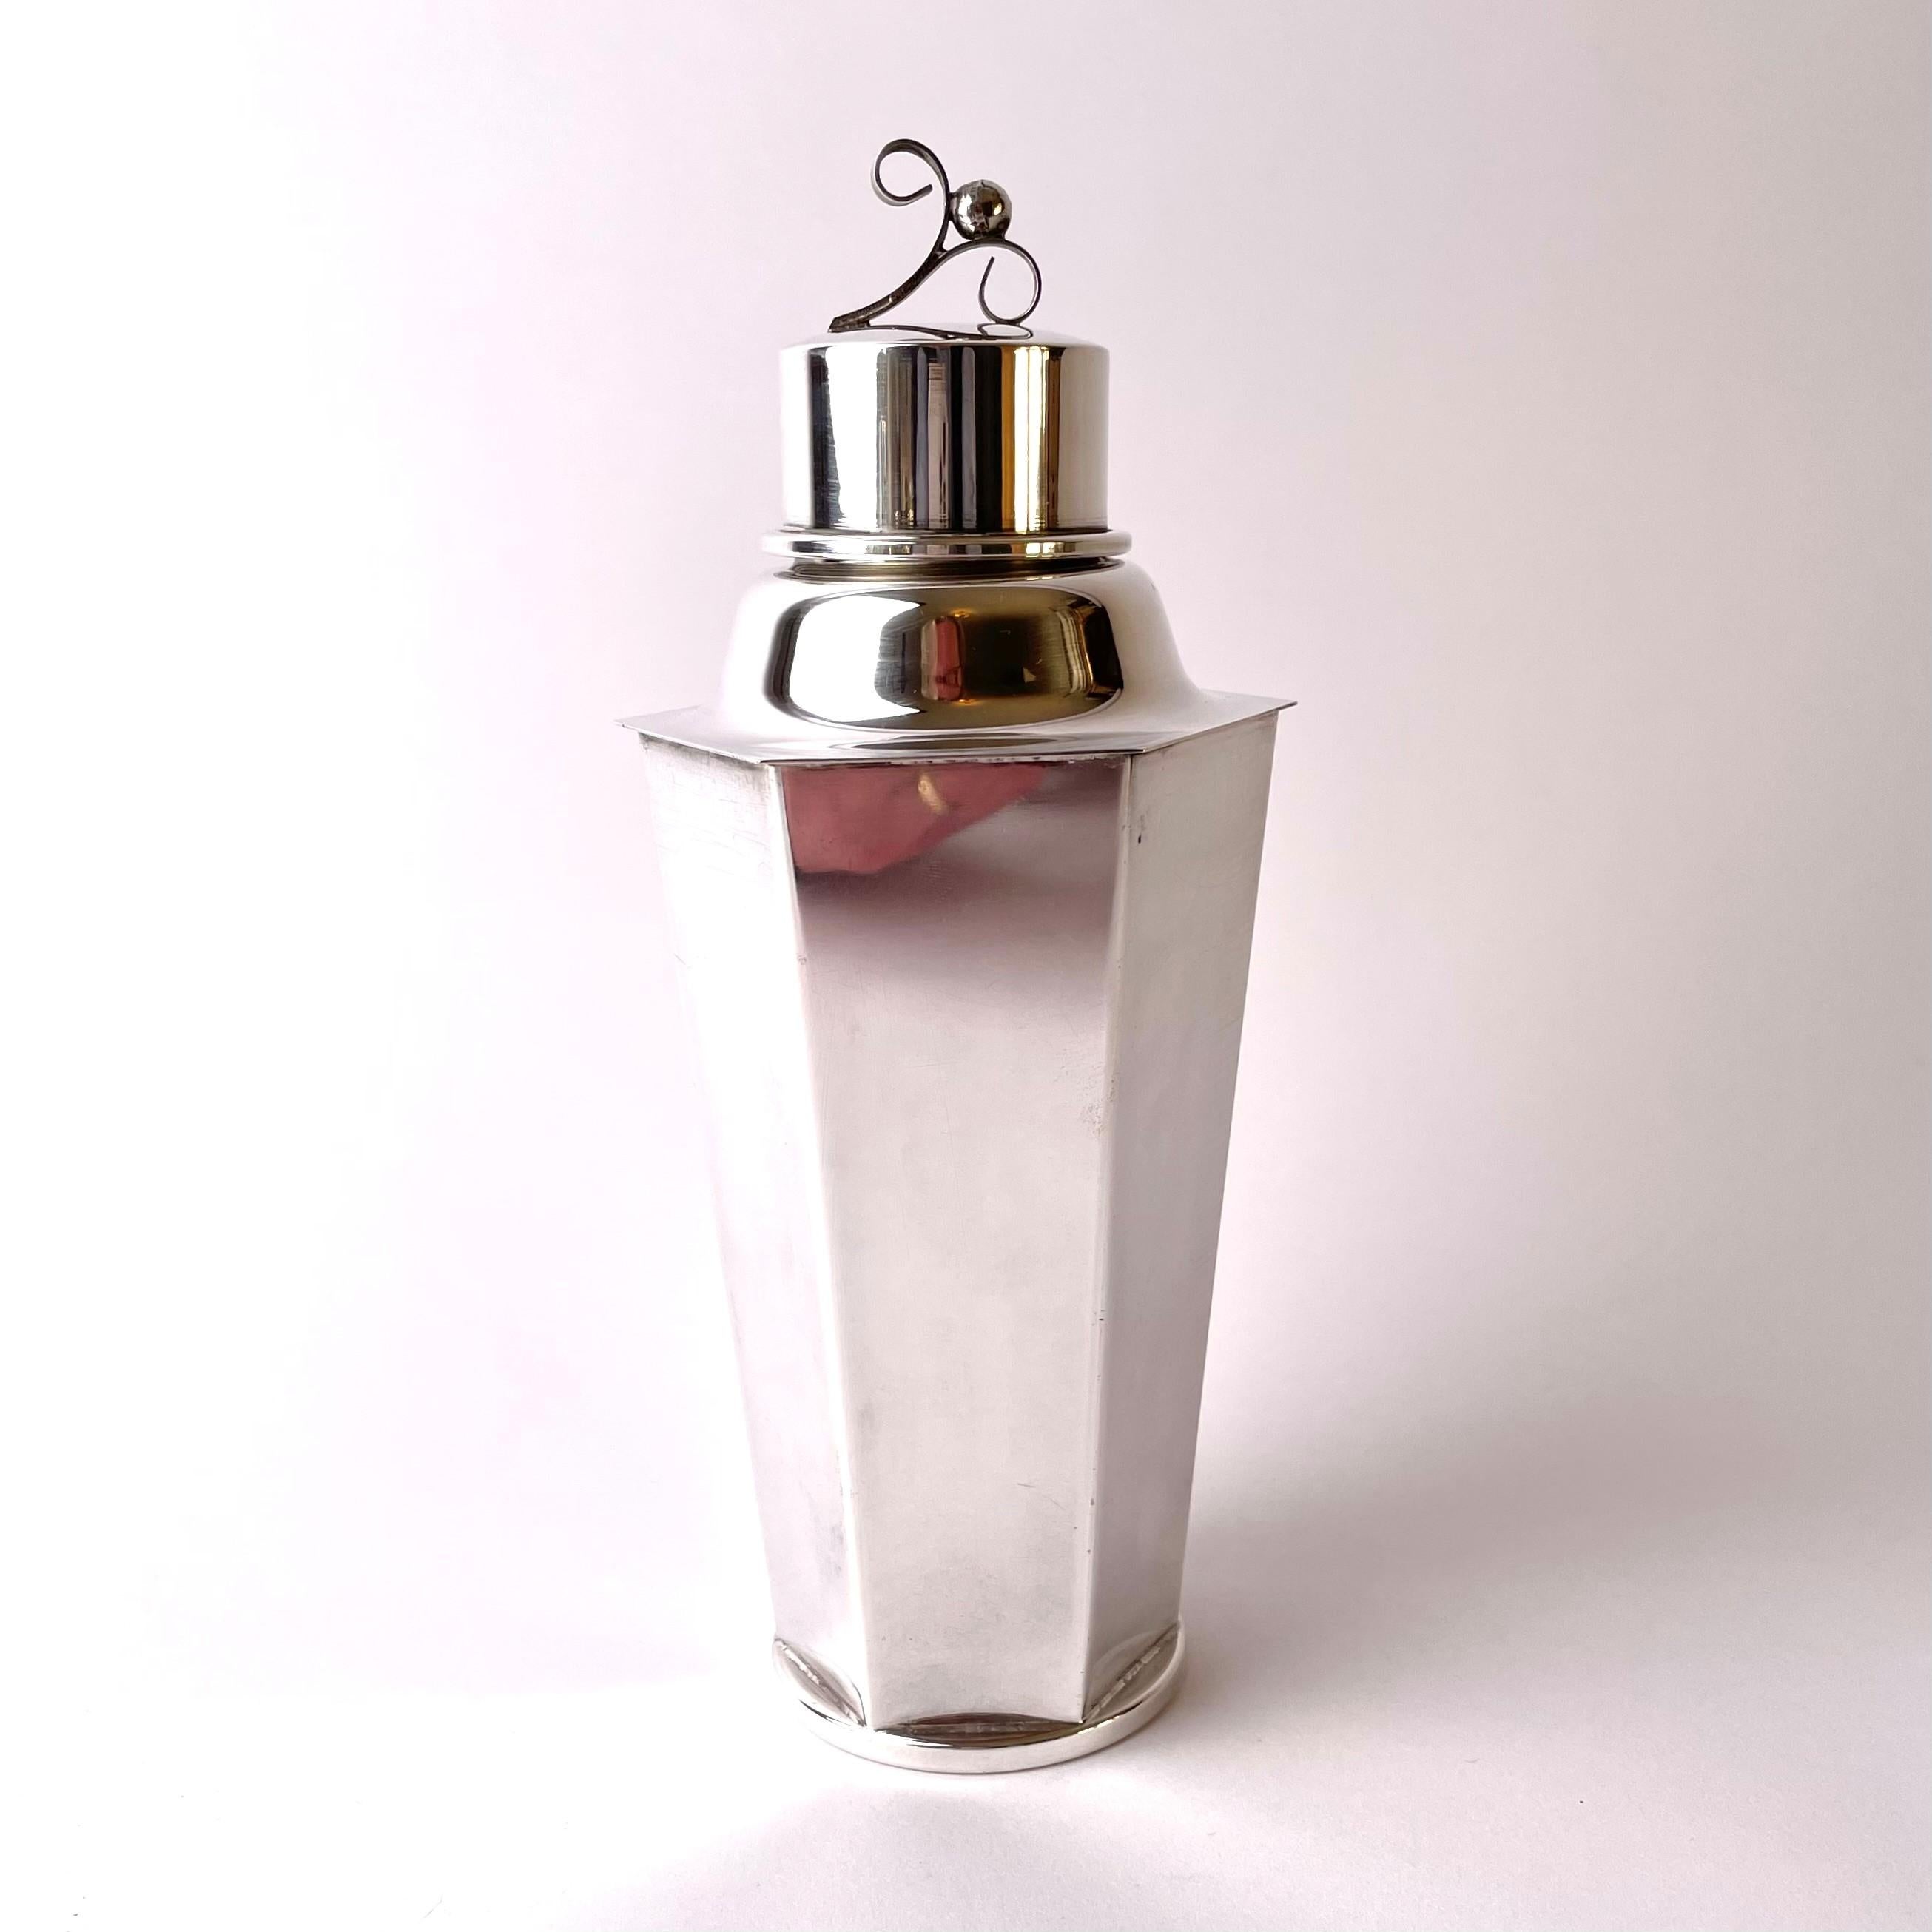 Silver-plated cocktail shaker in Swedish Grace from the 1920s. The cocktail shaker is designed in a sophisticated style, so typical of Swedish Grace.

Wear consistent with age and use.